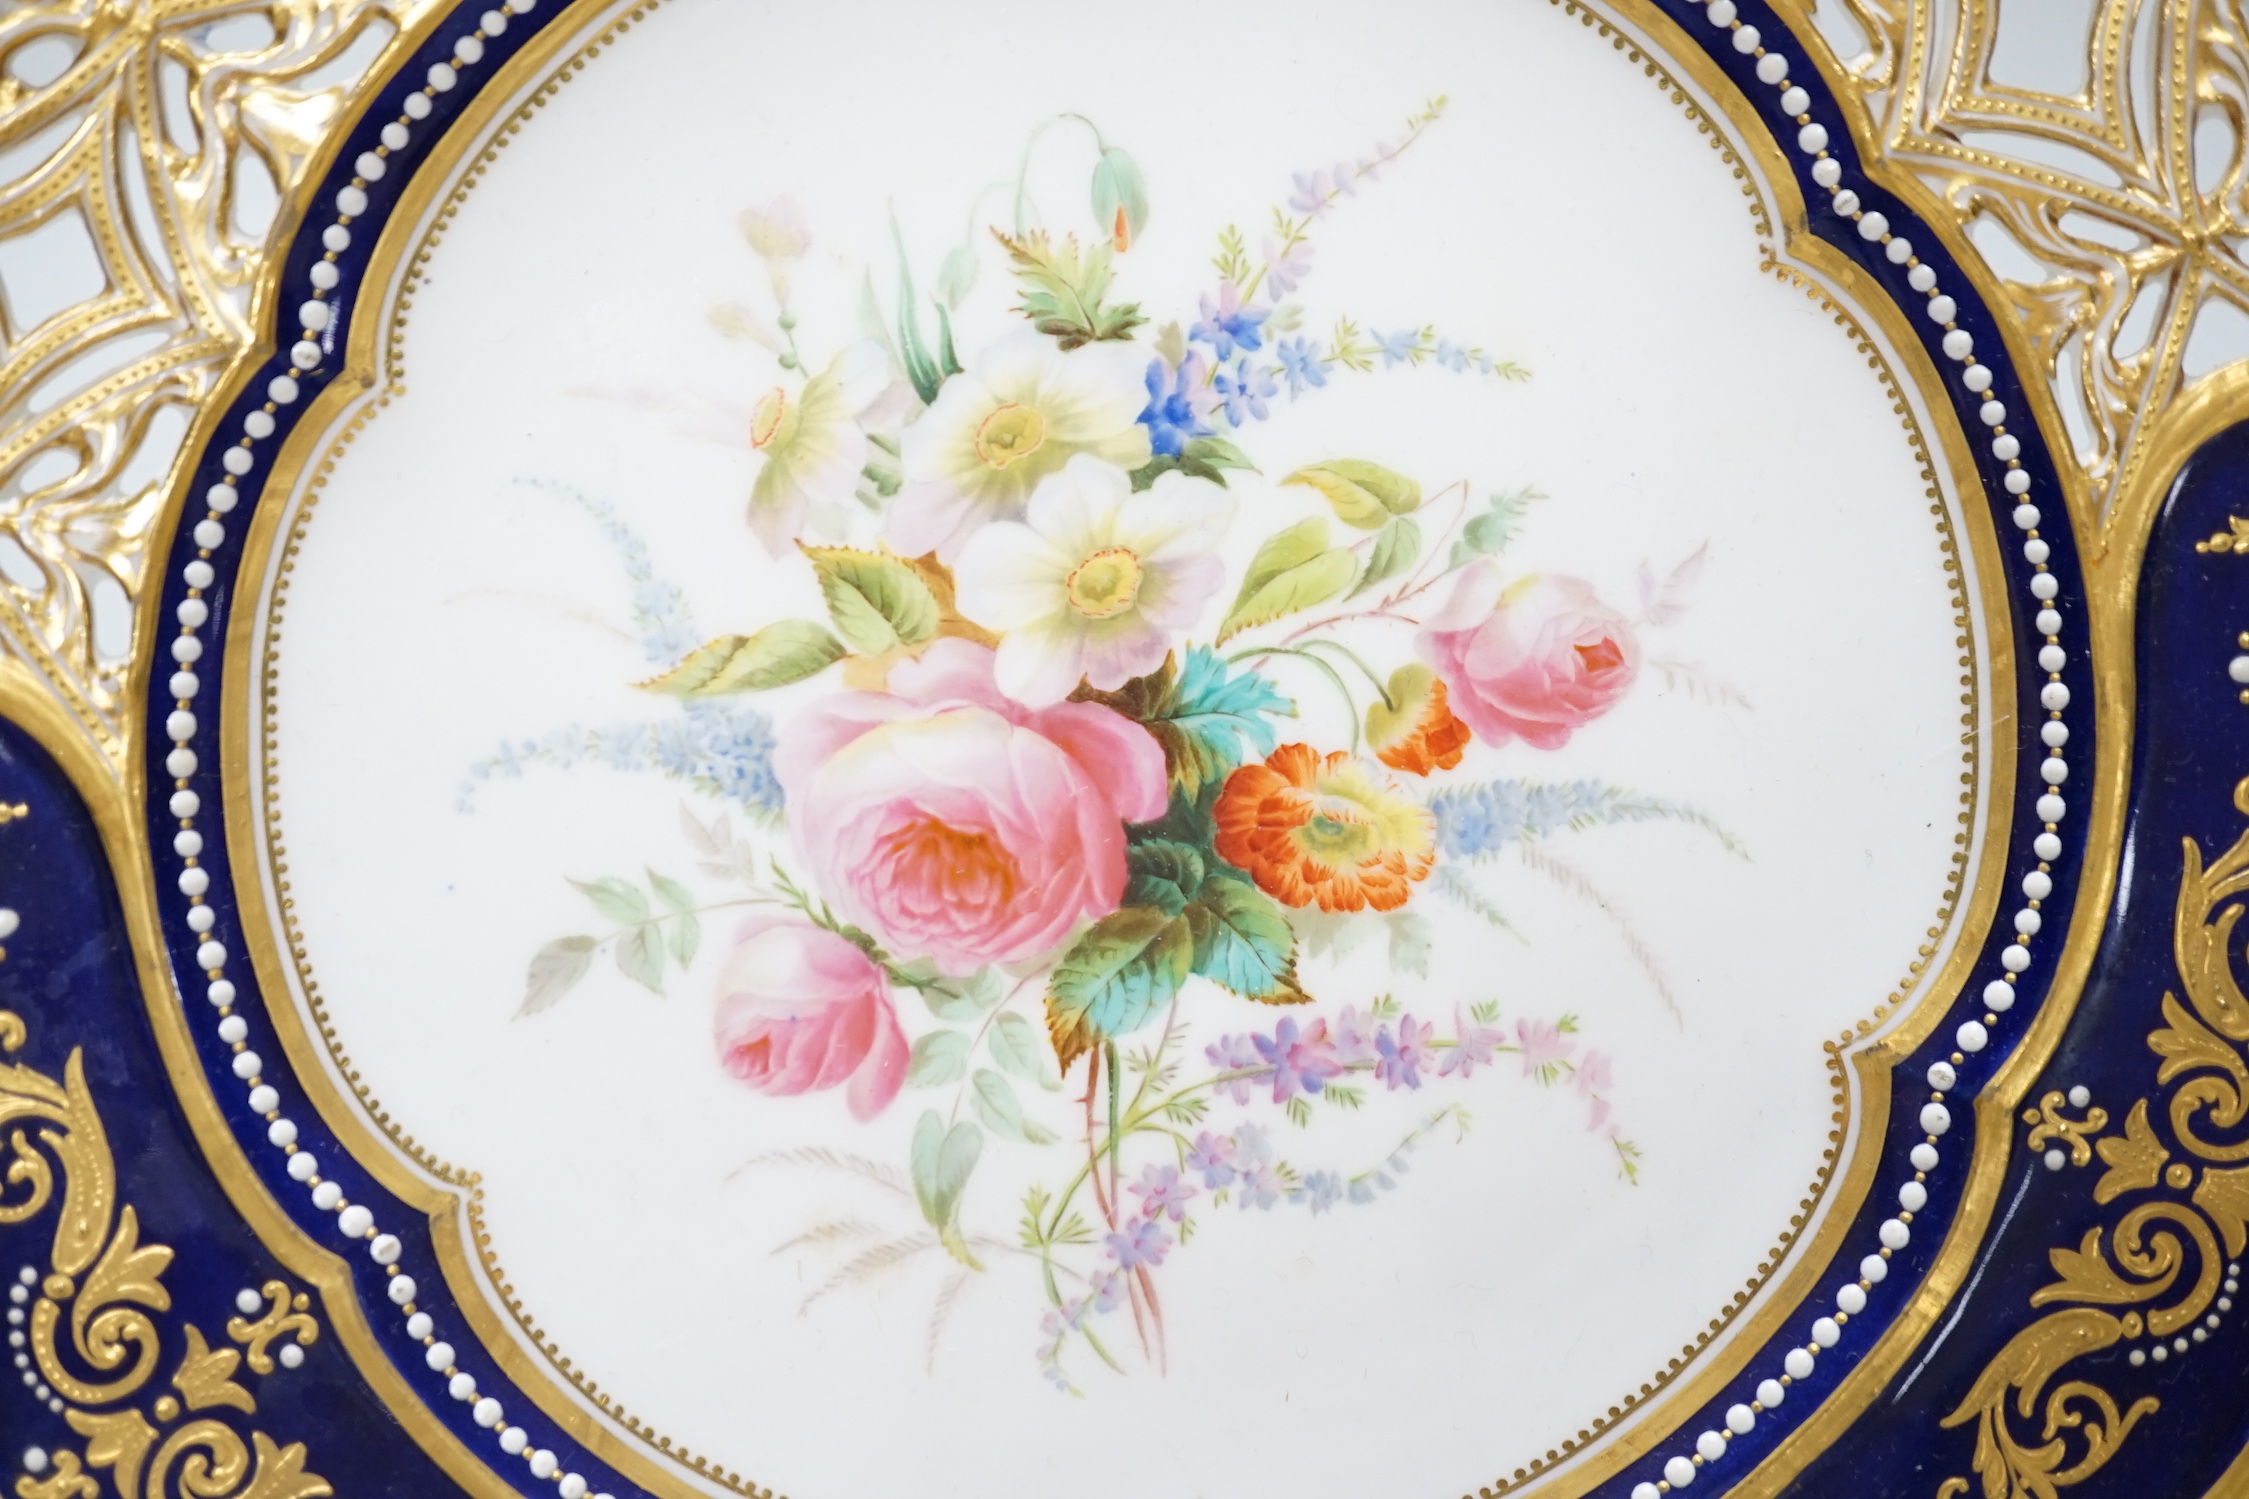 A Coalport plate with pierced border enamelled with white flowers and neo-classical raised paste - Image 2 of 3